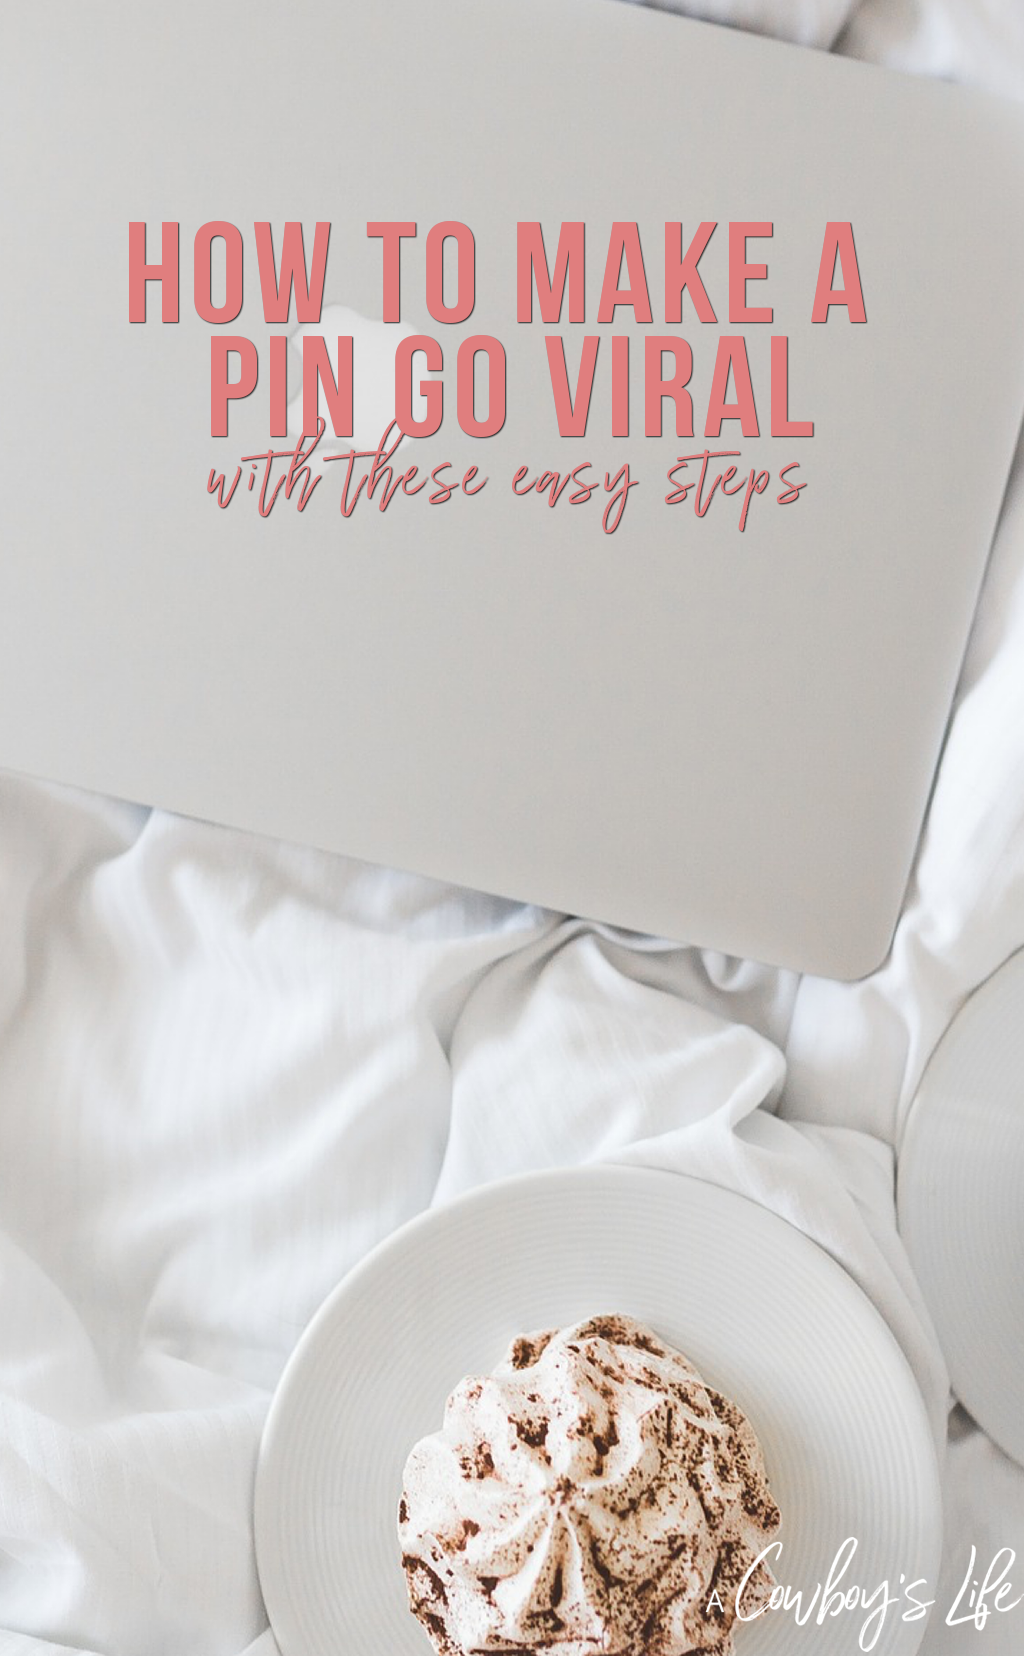 Tips on how to make a pin go viral! #bloggingtips 